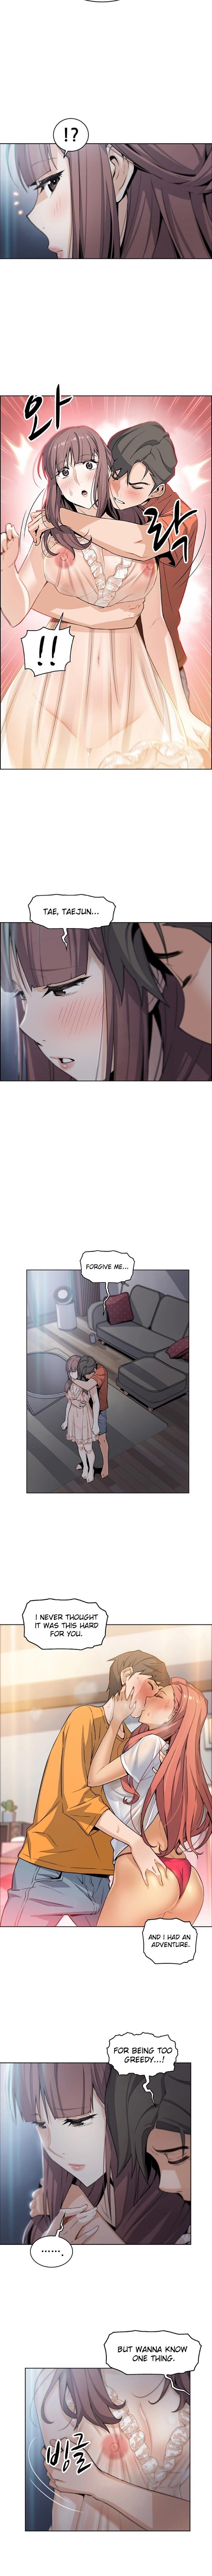 Housekeeper [Neck Pillow, Paper] Ch.49/49 [English] [Manhwa PDF] Completed 118